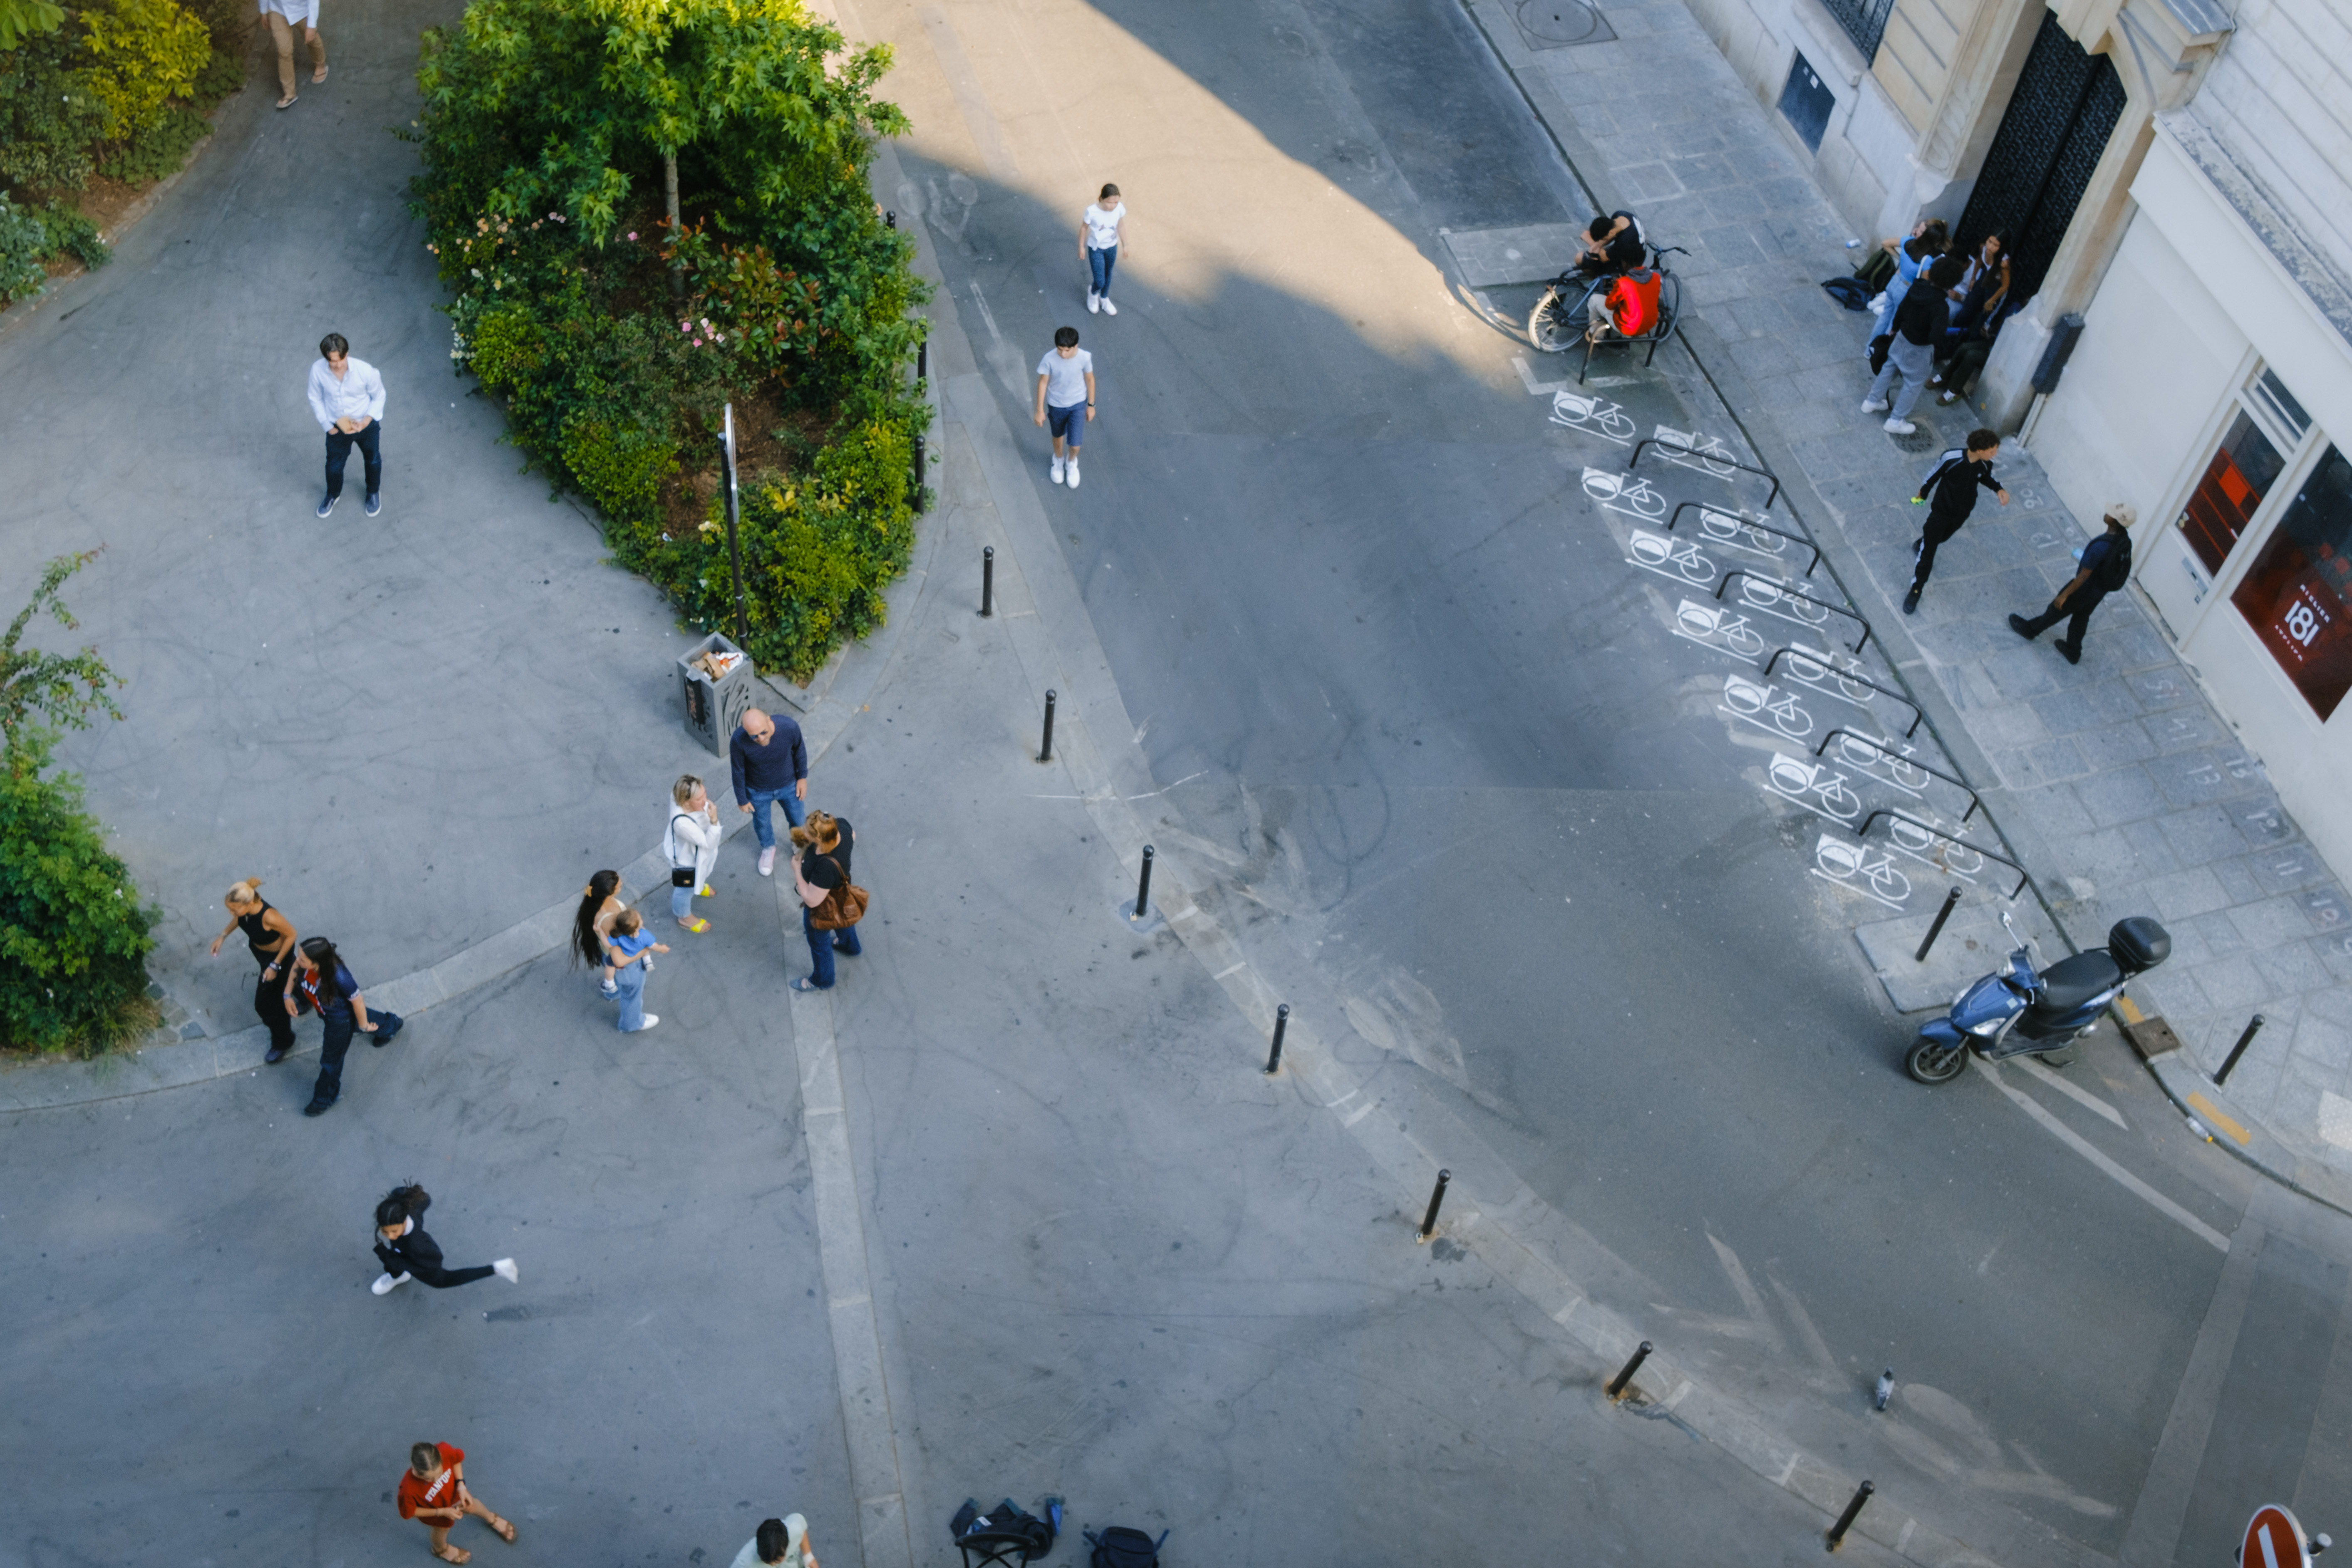 Photo from overhead of people chatting in the street near a park.